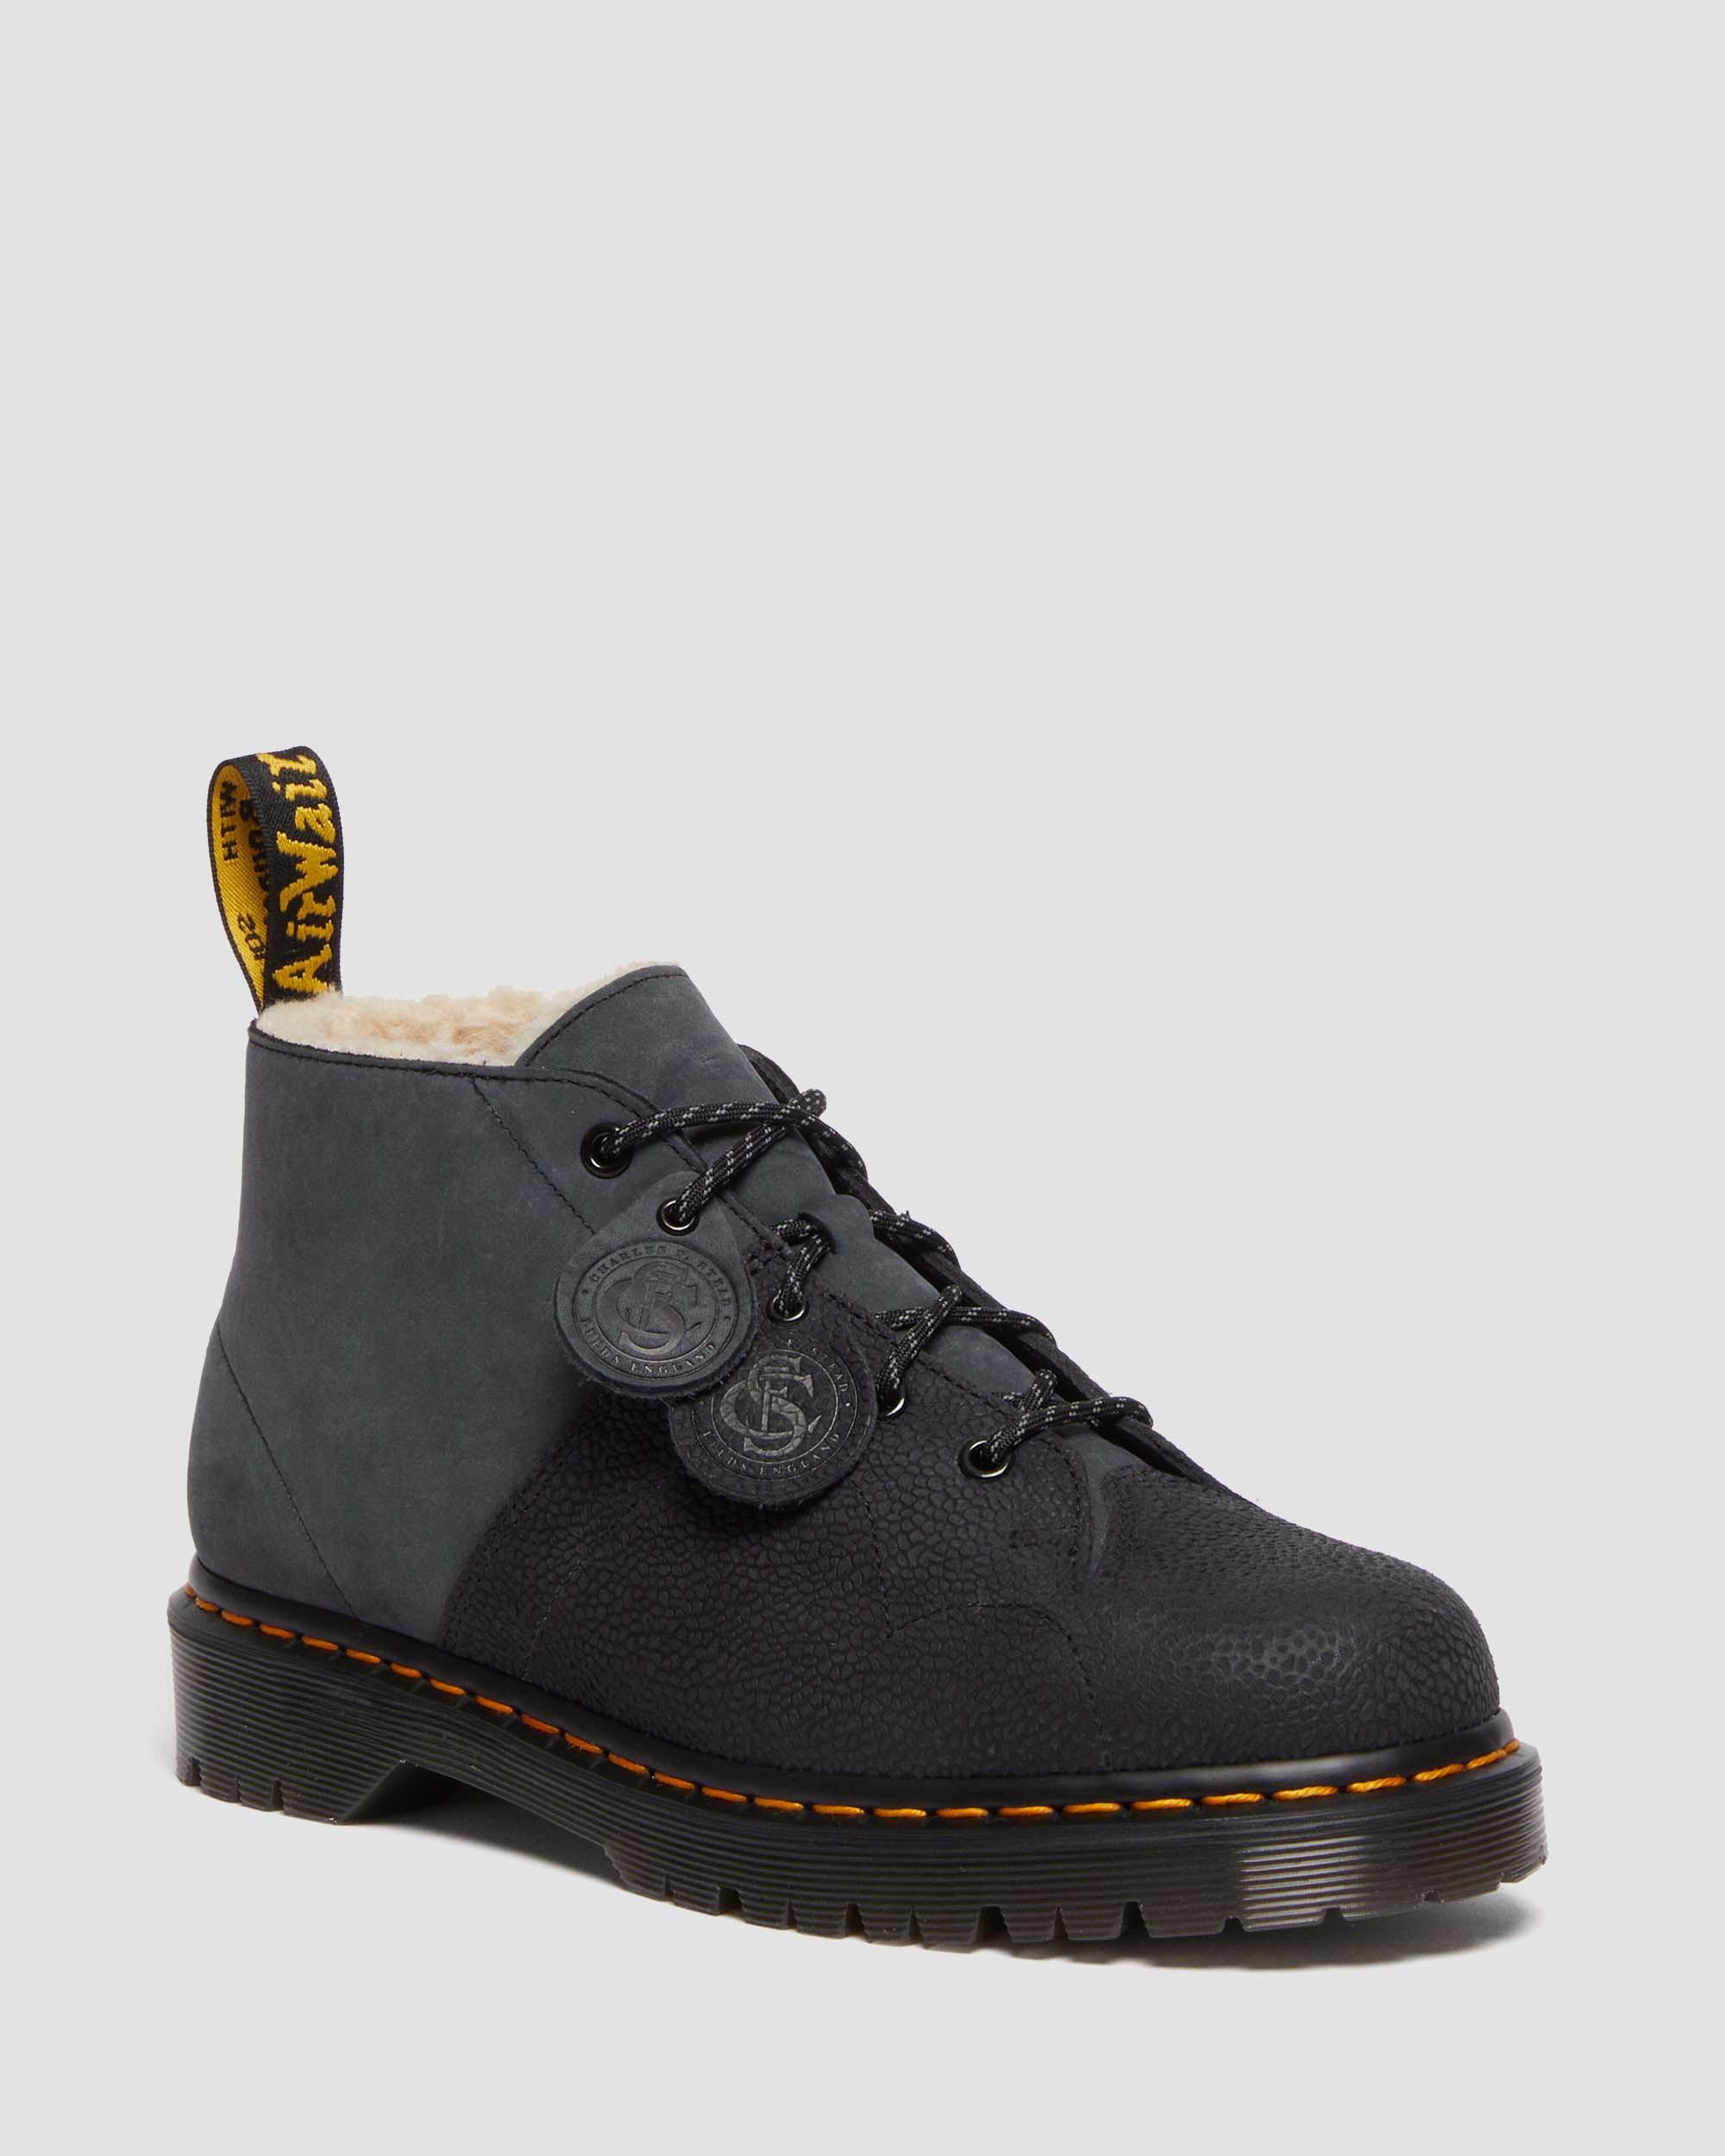 Church Vintage Smooth Leather Monkey Boots in Black | Dr. Martens